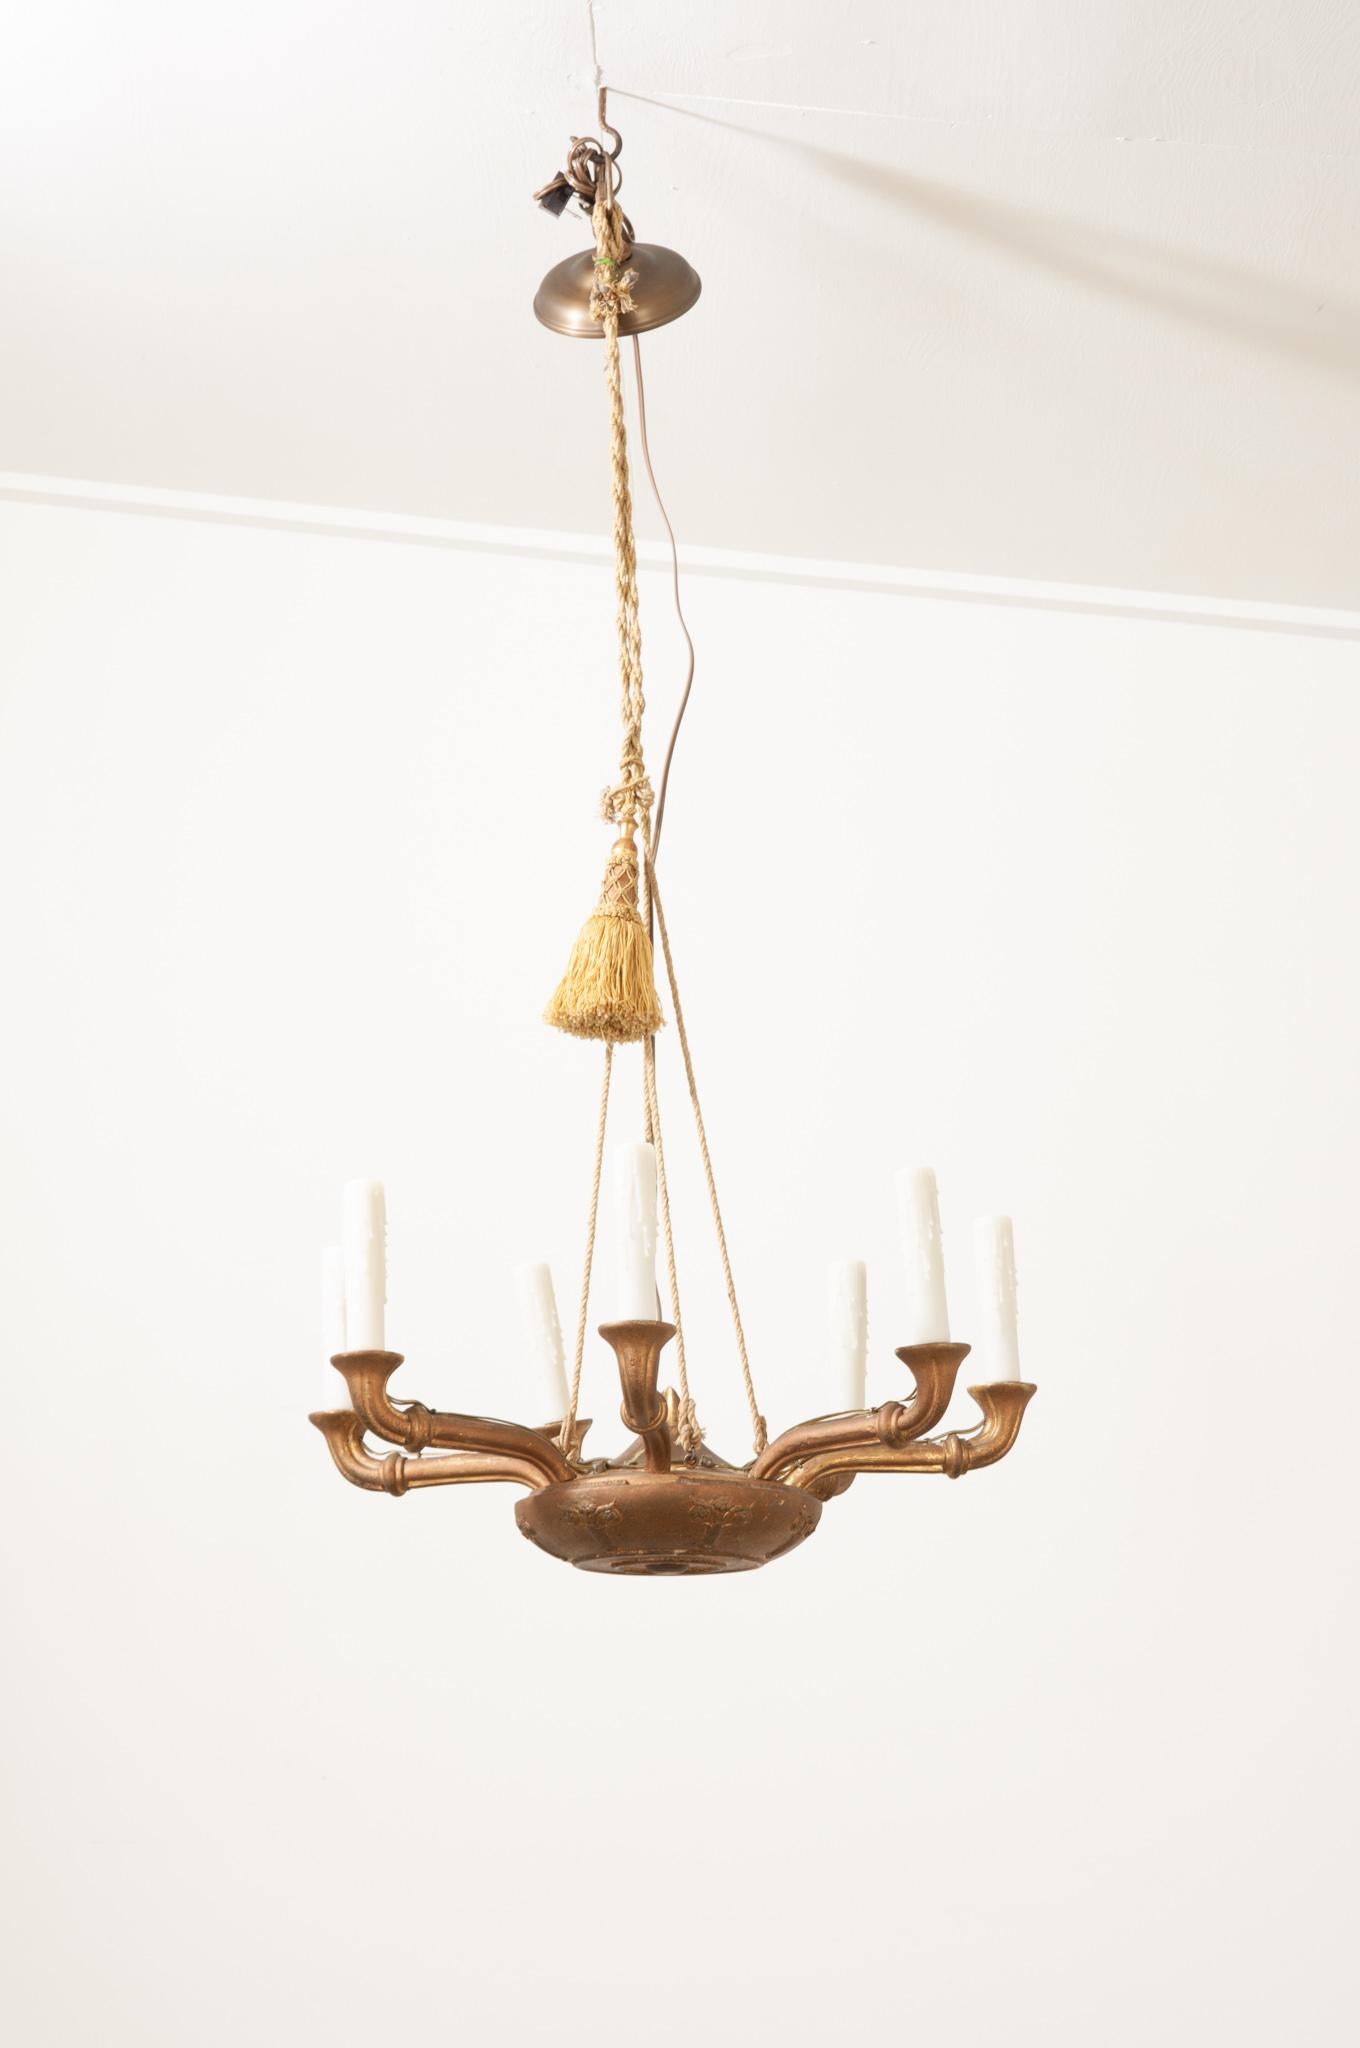 A wonderfully unique chandelier crafted in France in the Empire style. This wonderful chandelier is not very heavy and made of carved wood, it’s supported with golden rope and adorned with a gold tassel. Seven arms hoist new white faux melting wax